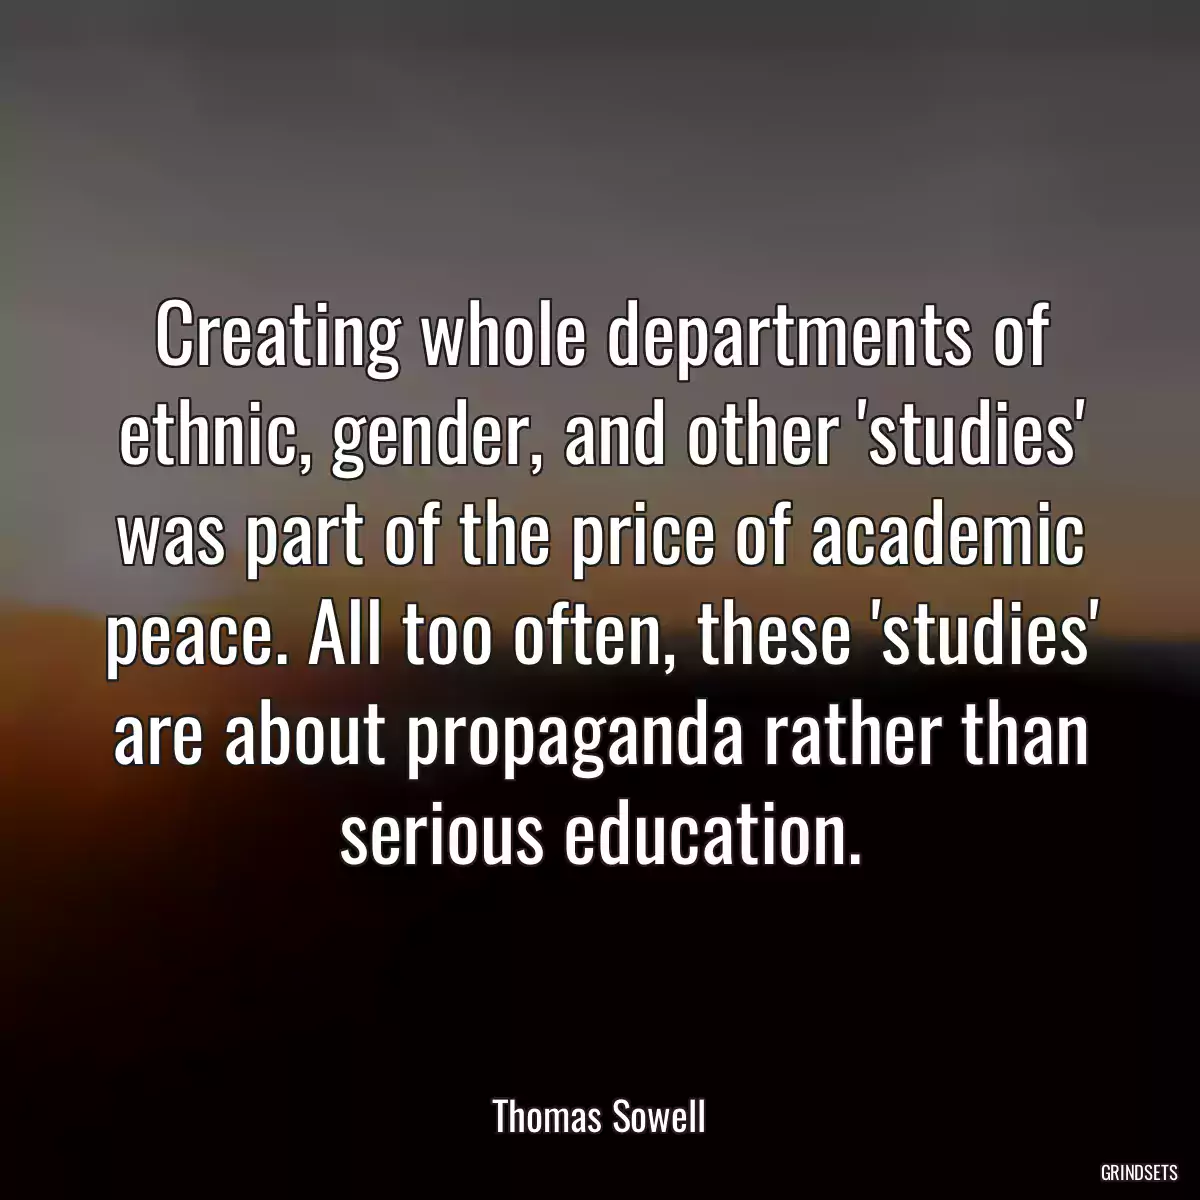 Creating whole departments of ethnic, gender, and other \'studies\' was part of the price of academic peace. All too often, these \'studies\' are about propaganda rather than serious education.